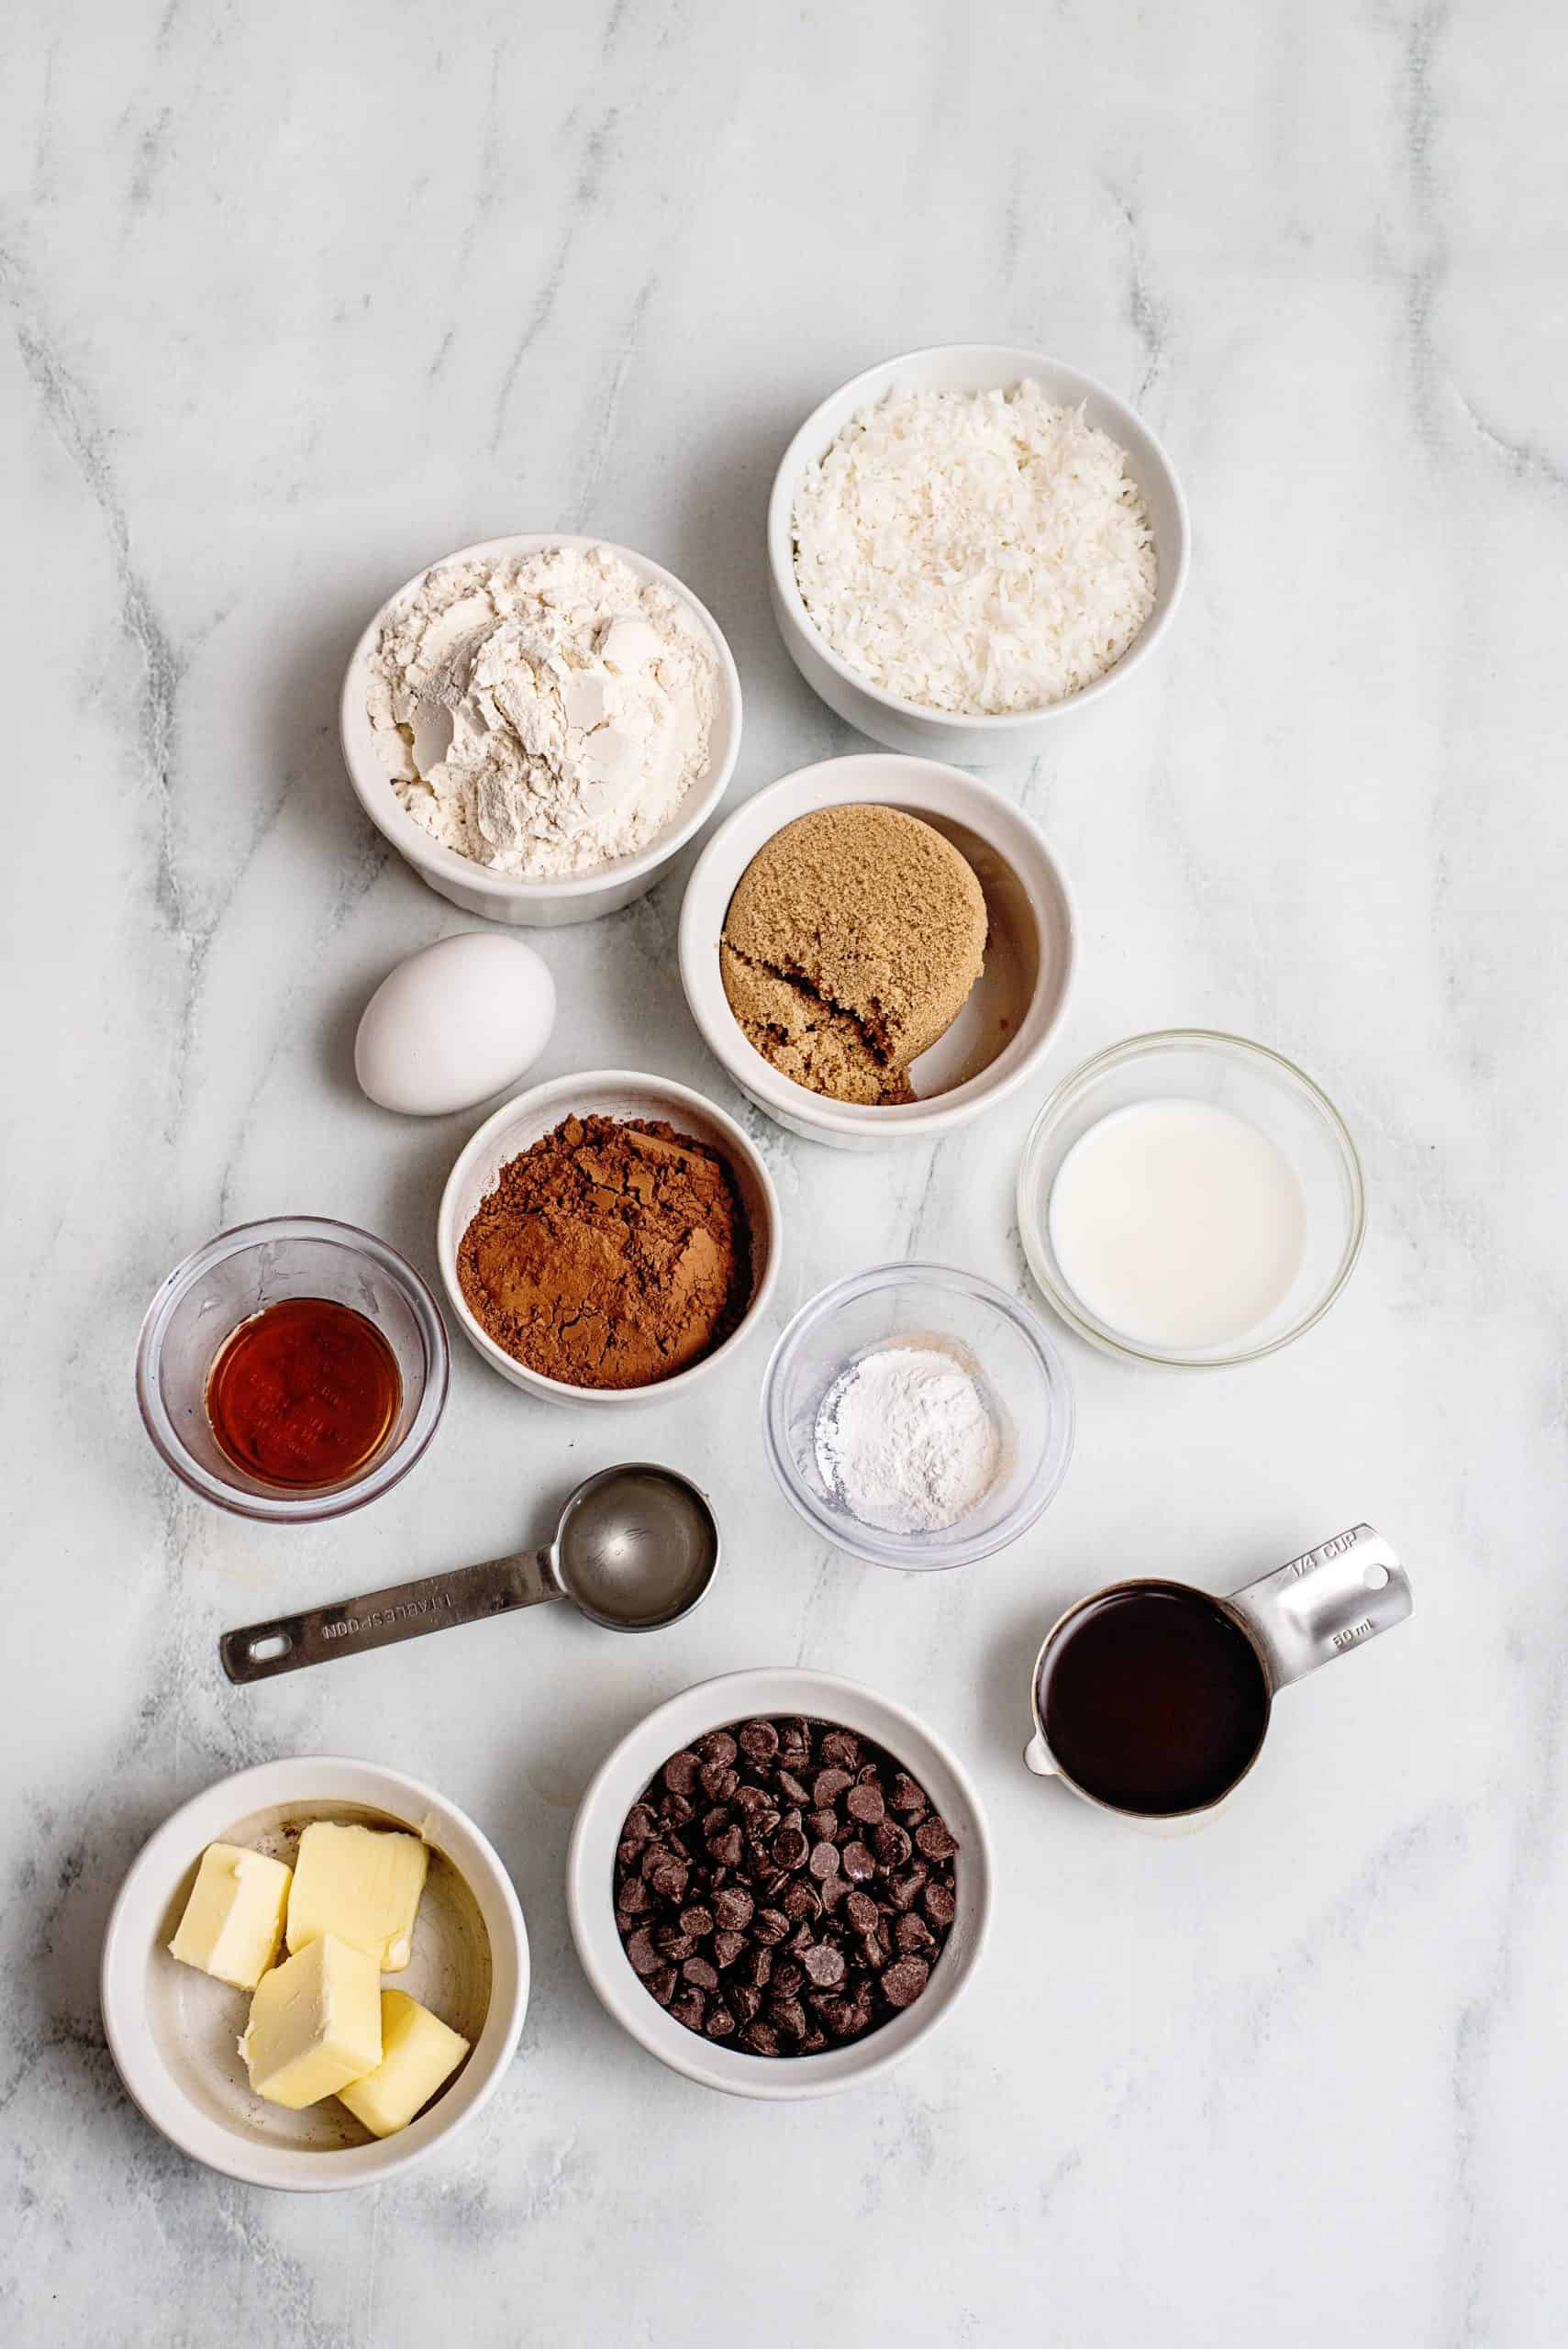 Ingredients needed: all purpose flour, unsweetened cocoa powder, baking powder, salt, light brown sugar, unsalted butter, egg , milk, hot coffee, vanilla extract, semisweet chocolate chips, light corn syrup and sweetened shredded coconut